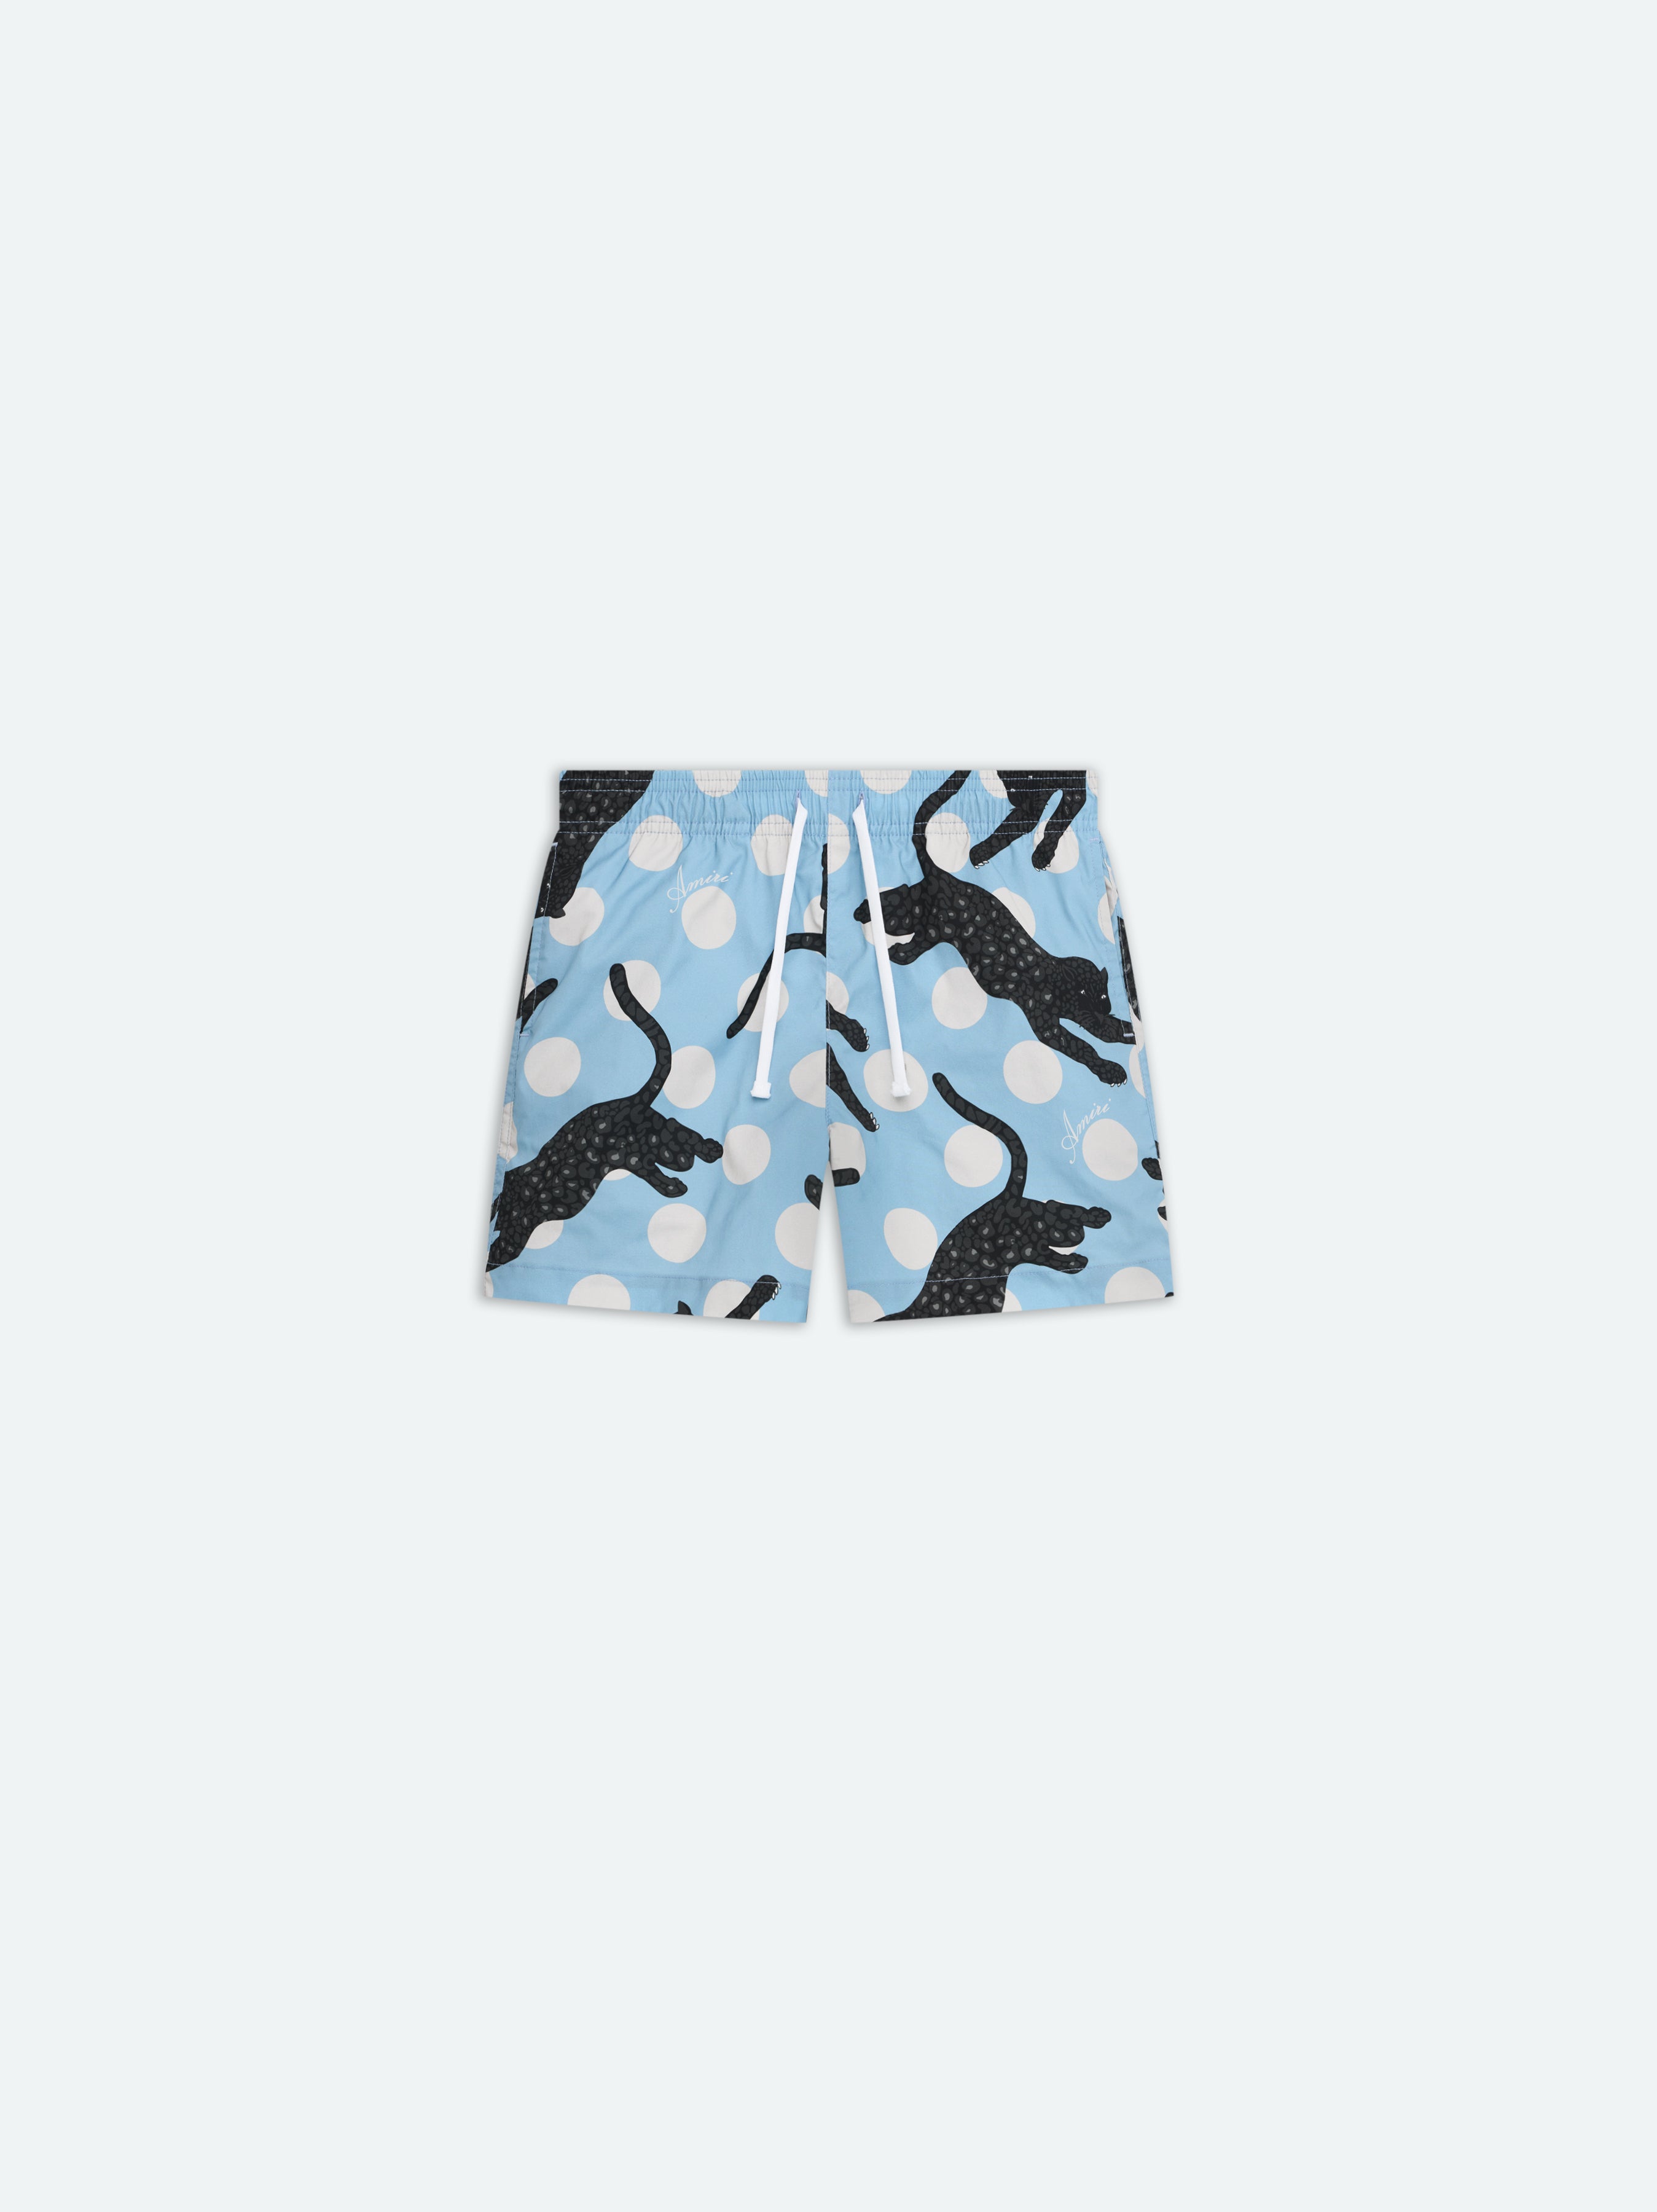 Product KIDS - LEOPARD POLKA DOTS SWIM TRUNK - Air Blue featured image